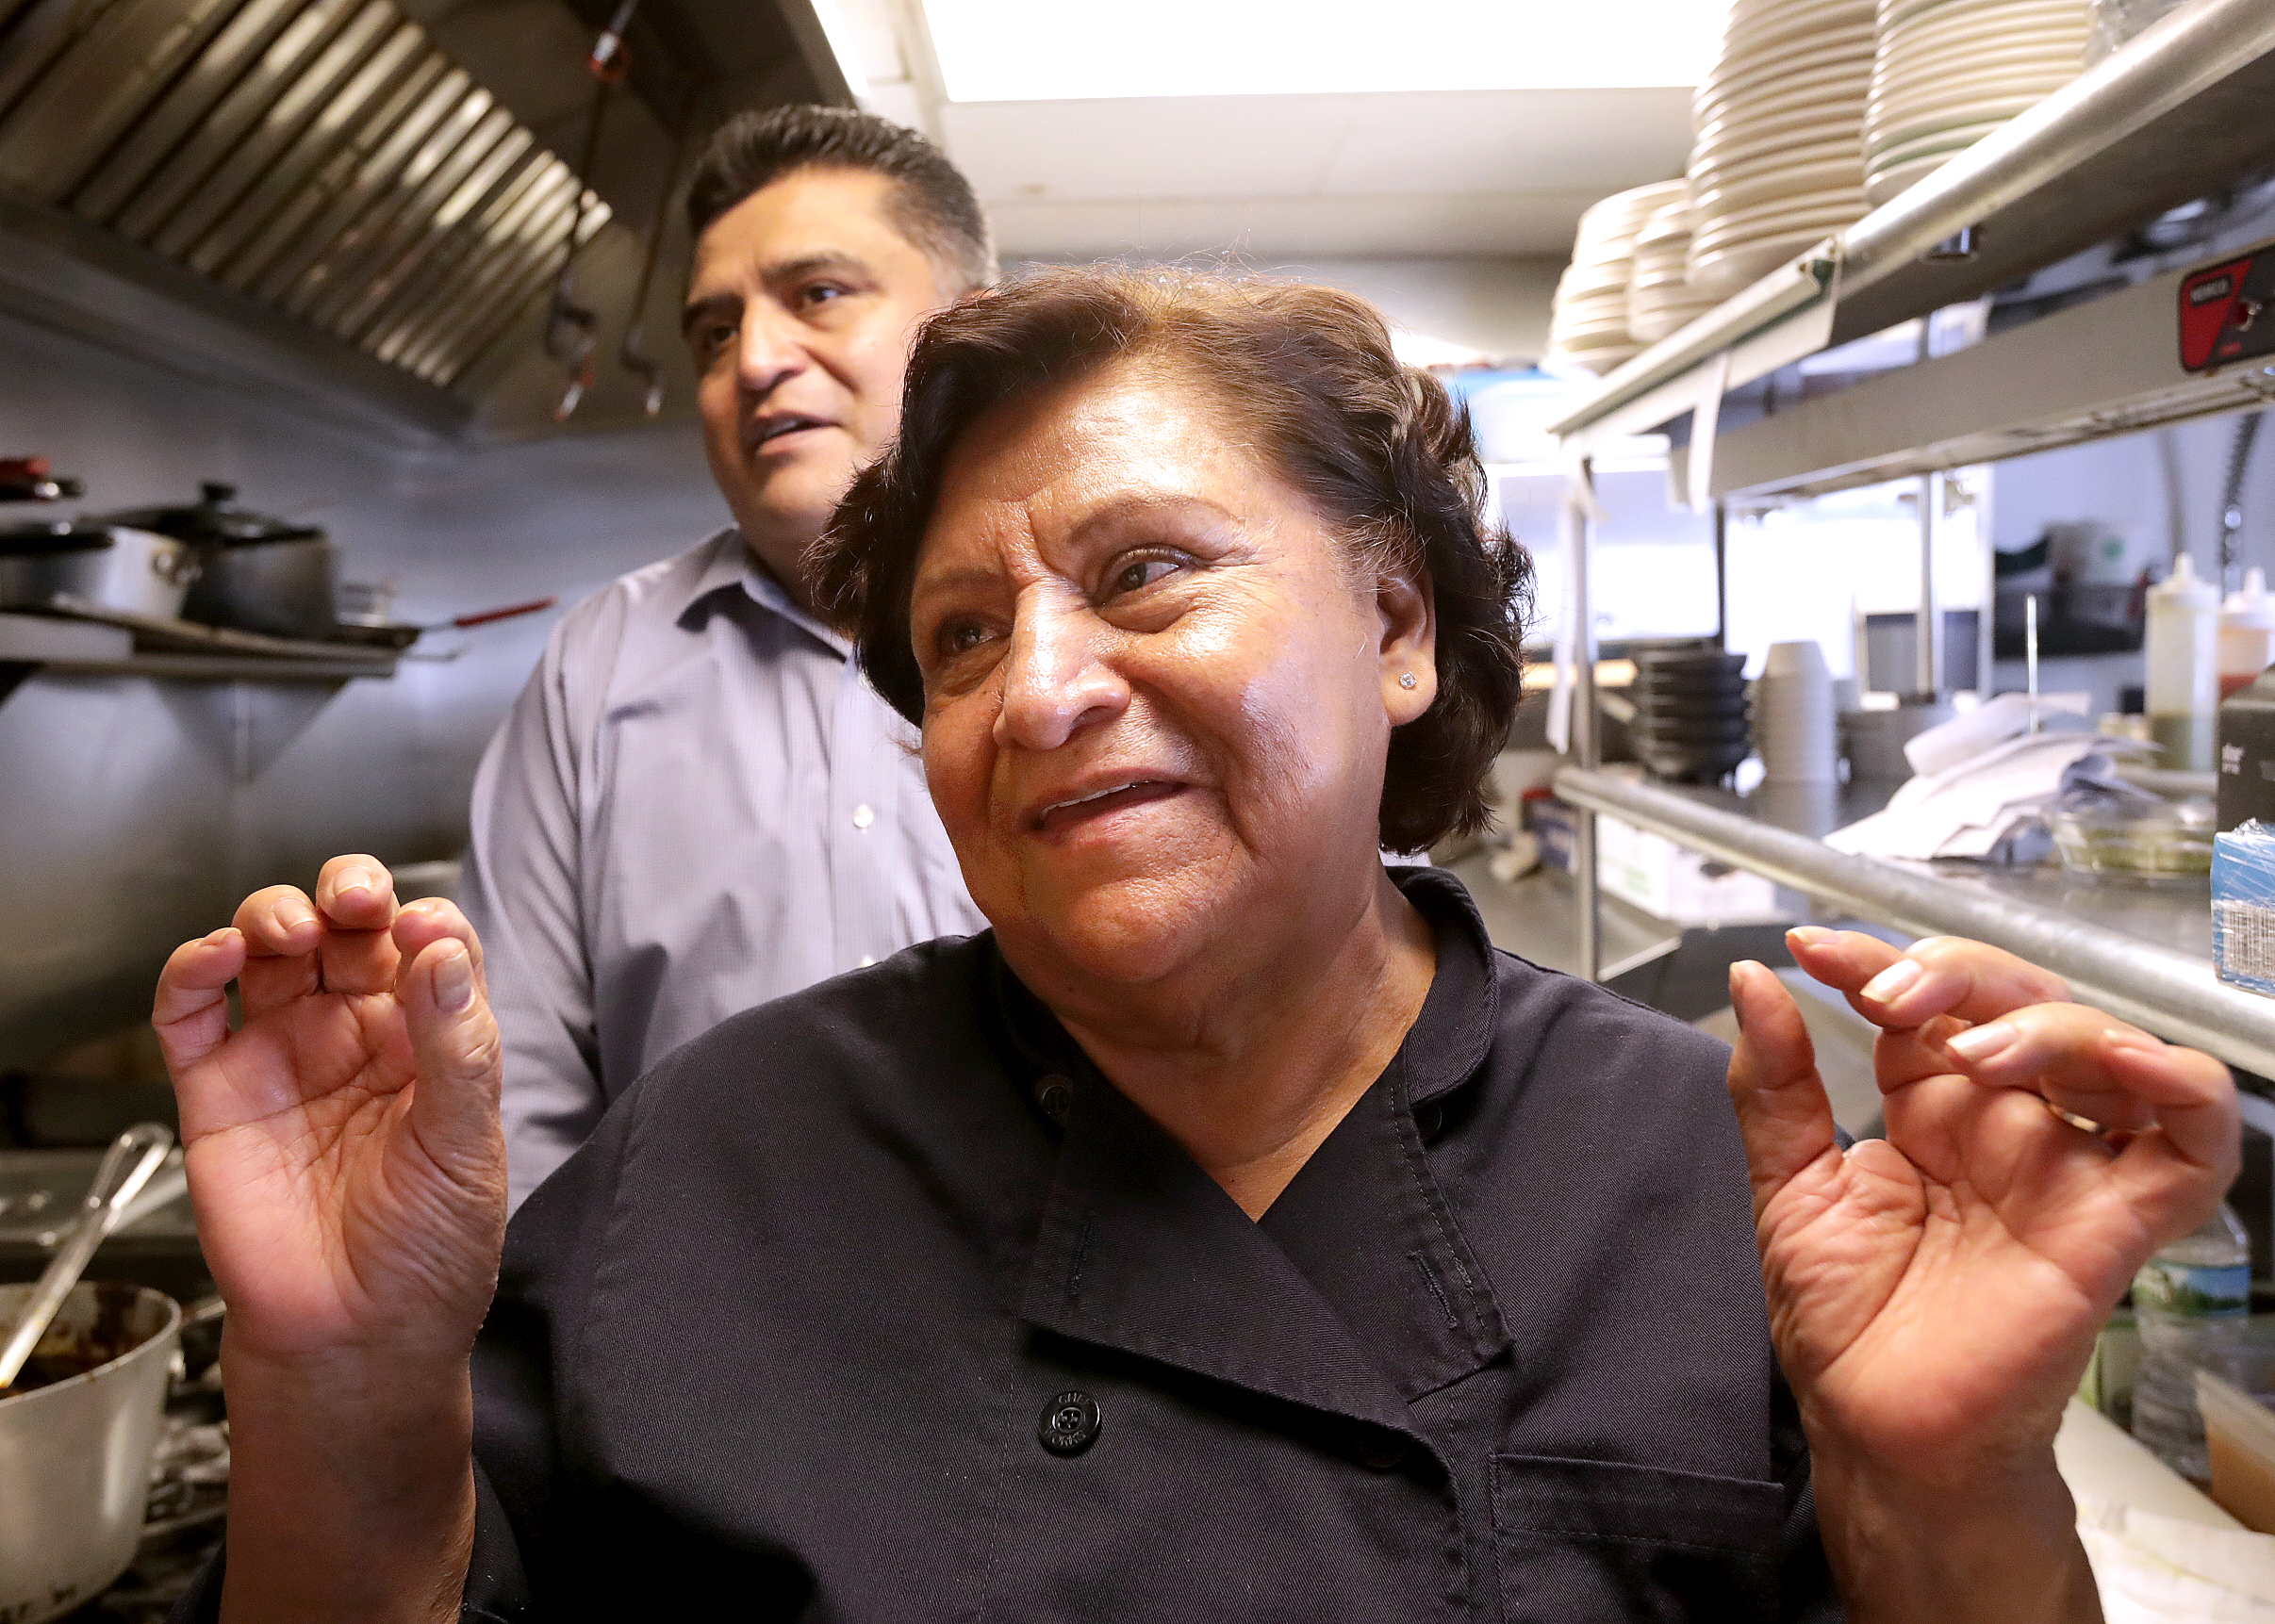 Closeup shot of a woman and her adult son in the kitchen of a restaurant